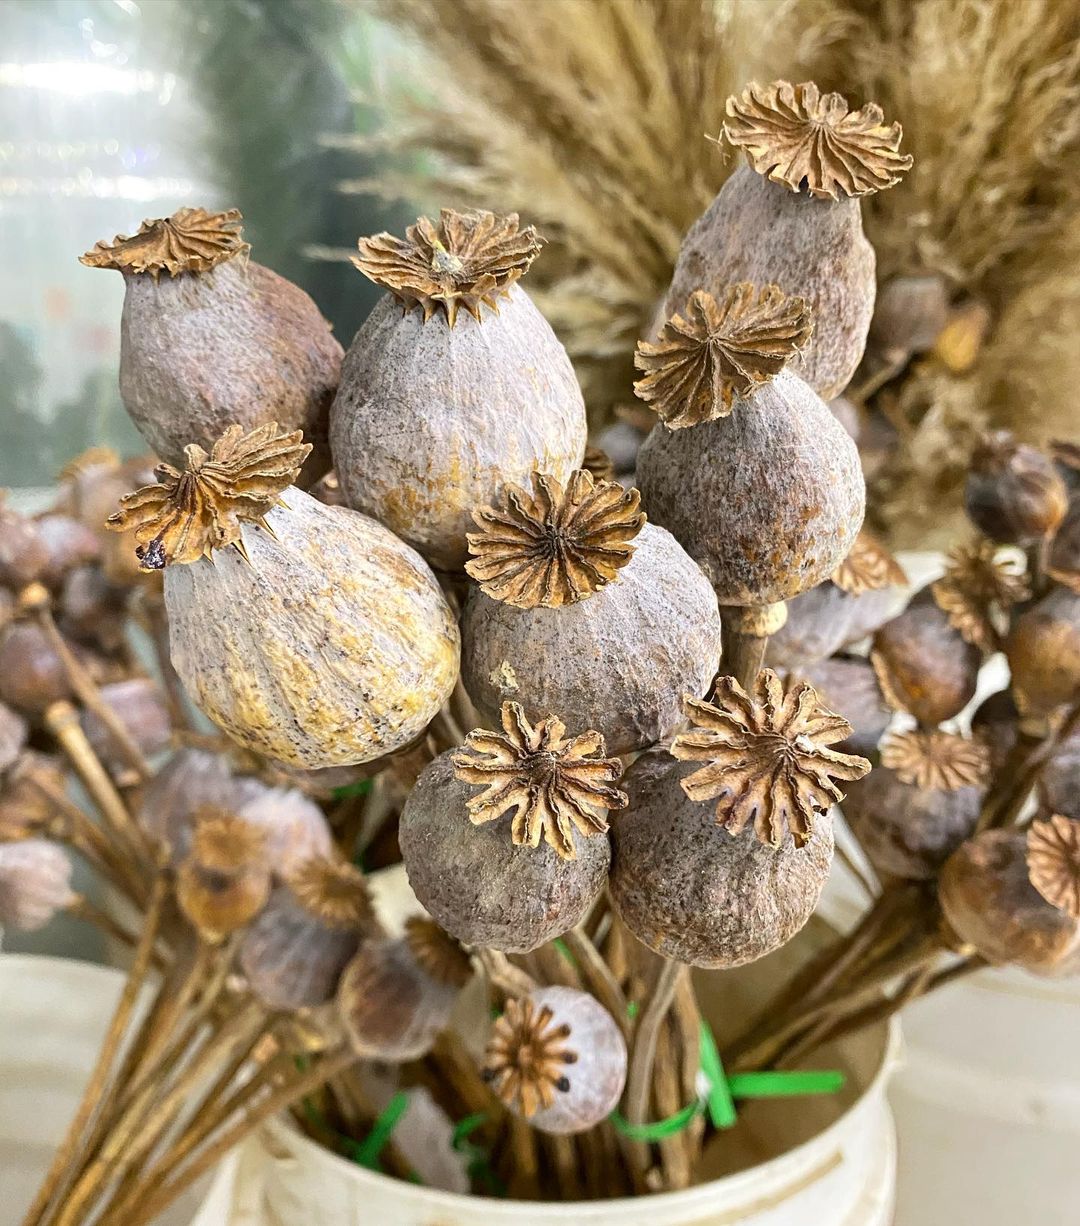 where can i buy dried poppy pods